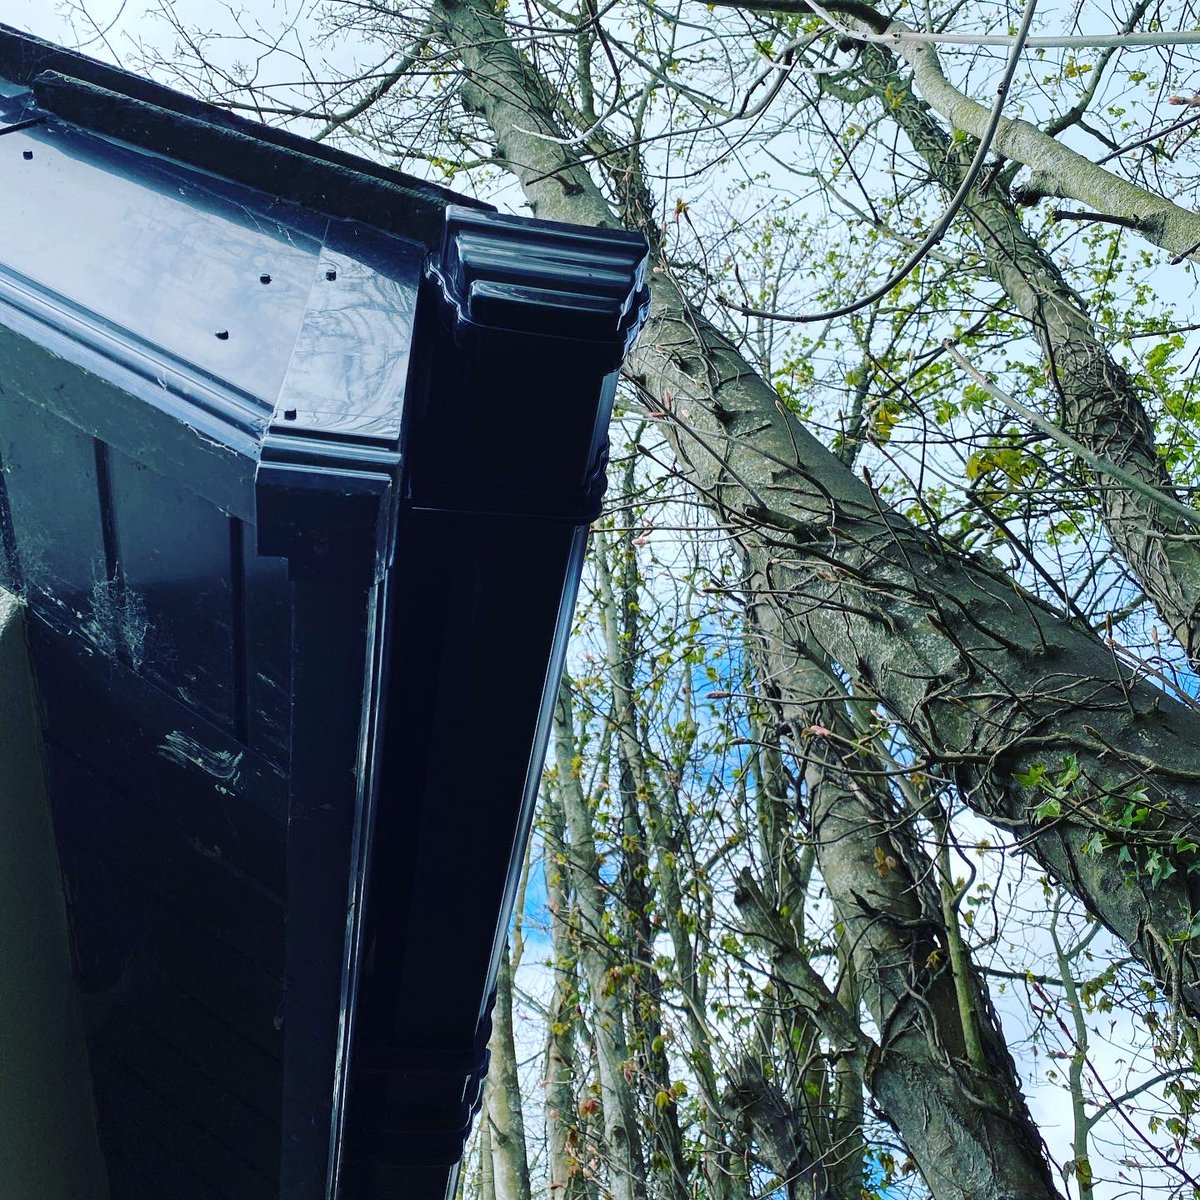 #gutterrepairs by #teamtmg over the weekend ensuring #nomoreleaks 
.
Chill out today and back to it #brightandearly tomorrow.
.
Enjoy your Sunday #muddergutters 
#guttercleaning #gutterclearing #guttersucker #4kguttercam #bestinmeath #supportsmallbusiness #supportlocalbusiness